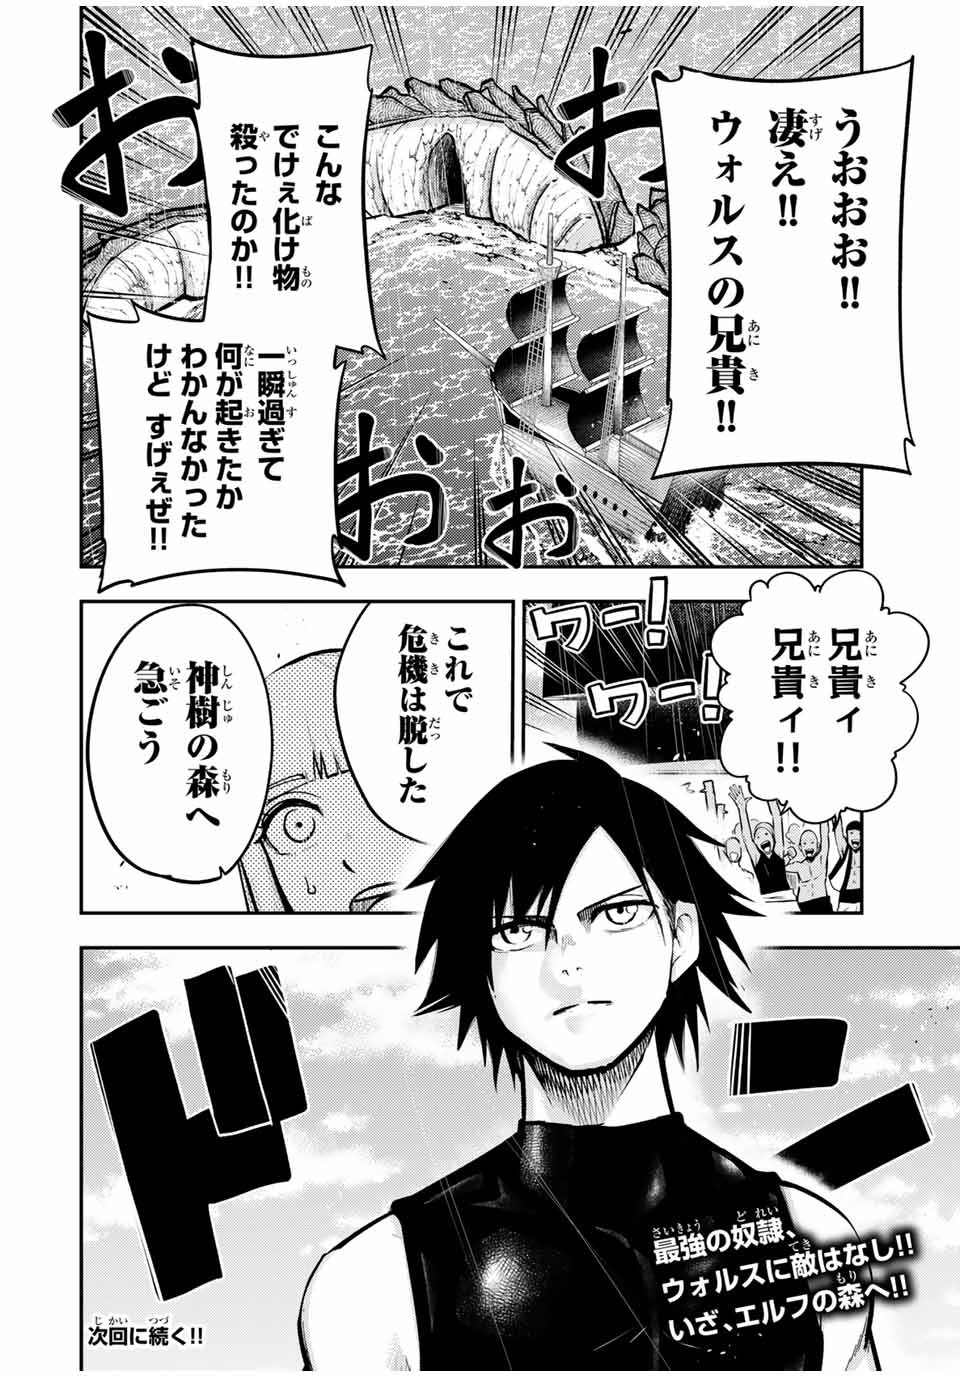 the strongest former prince-; 奴隷転生 ～その奴隷、最強の元王子につき～ 第40話 - Page 19